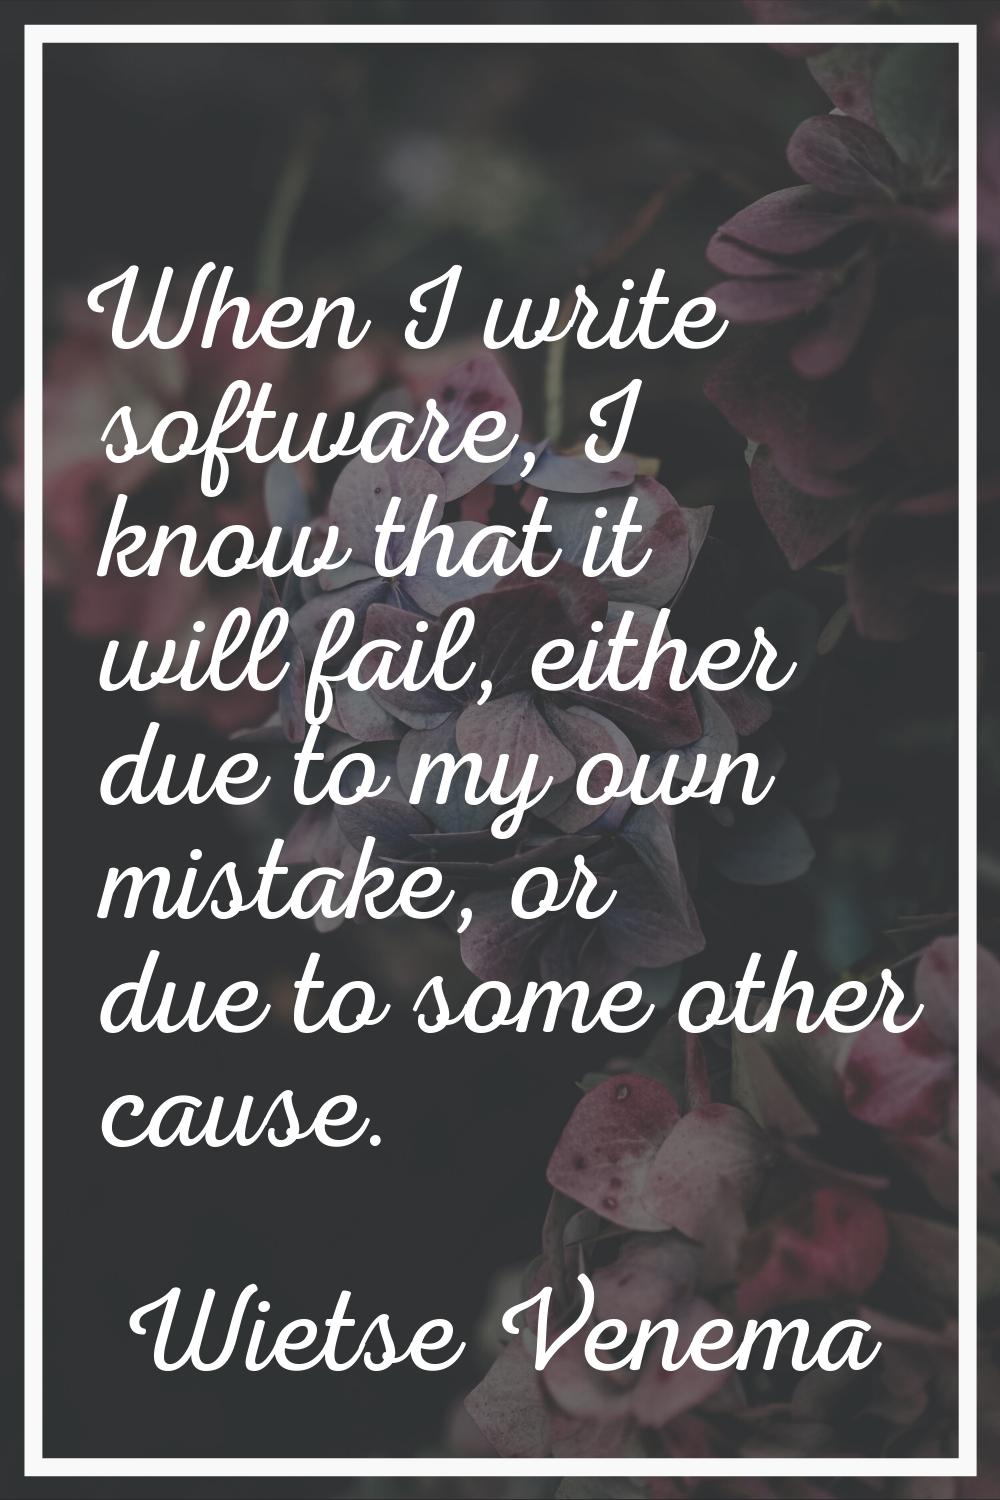 When I write software, I know that it will fail, either due to my own mistake, or due to some other